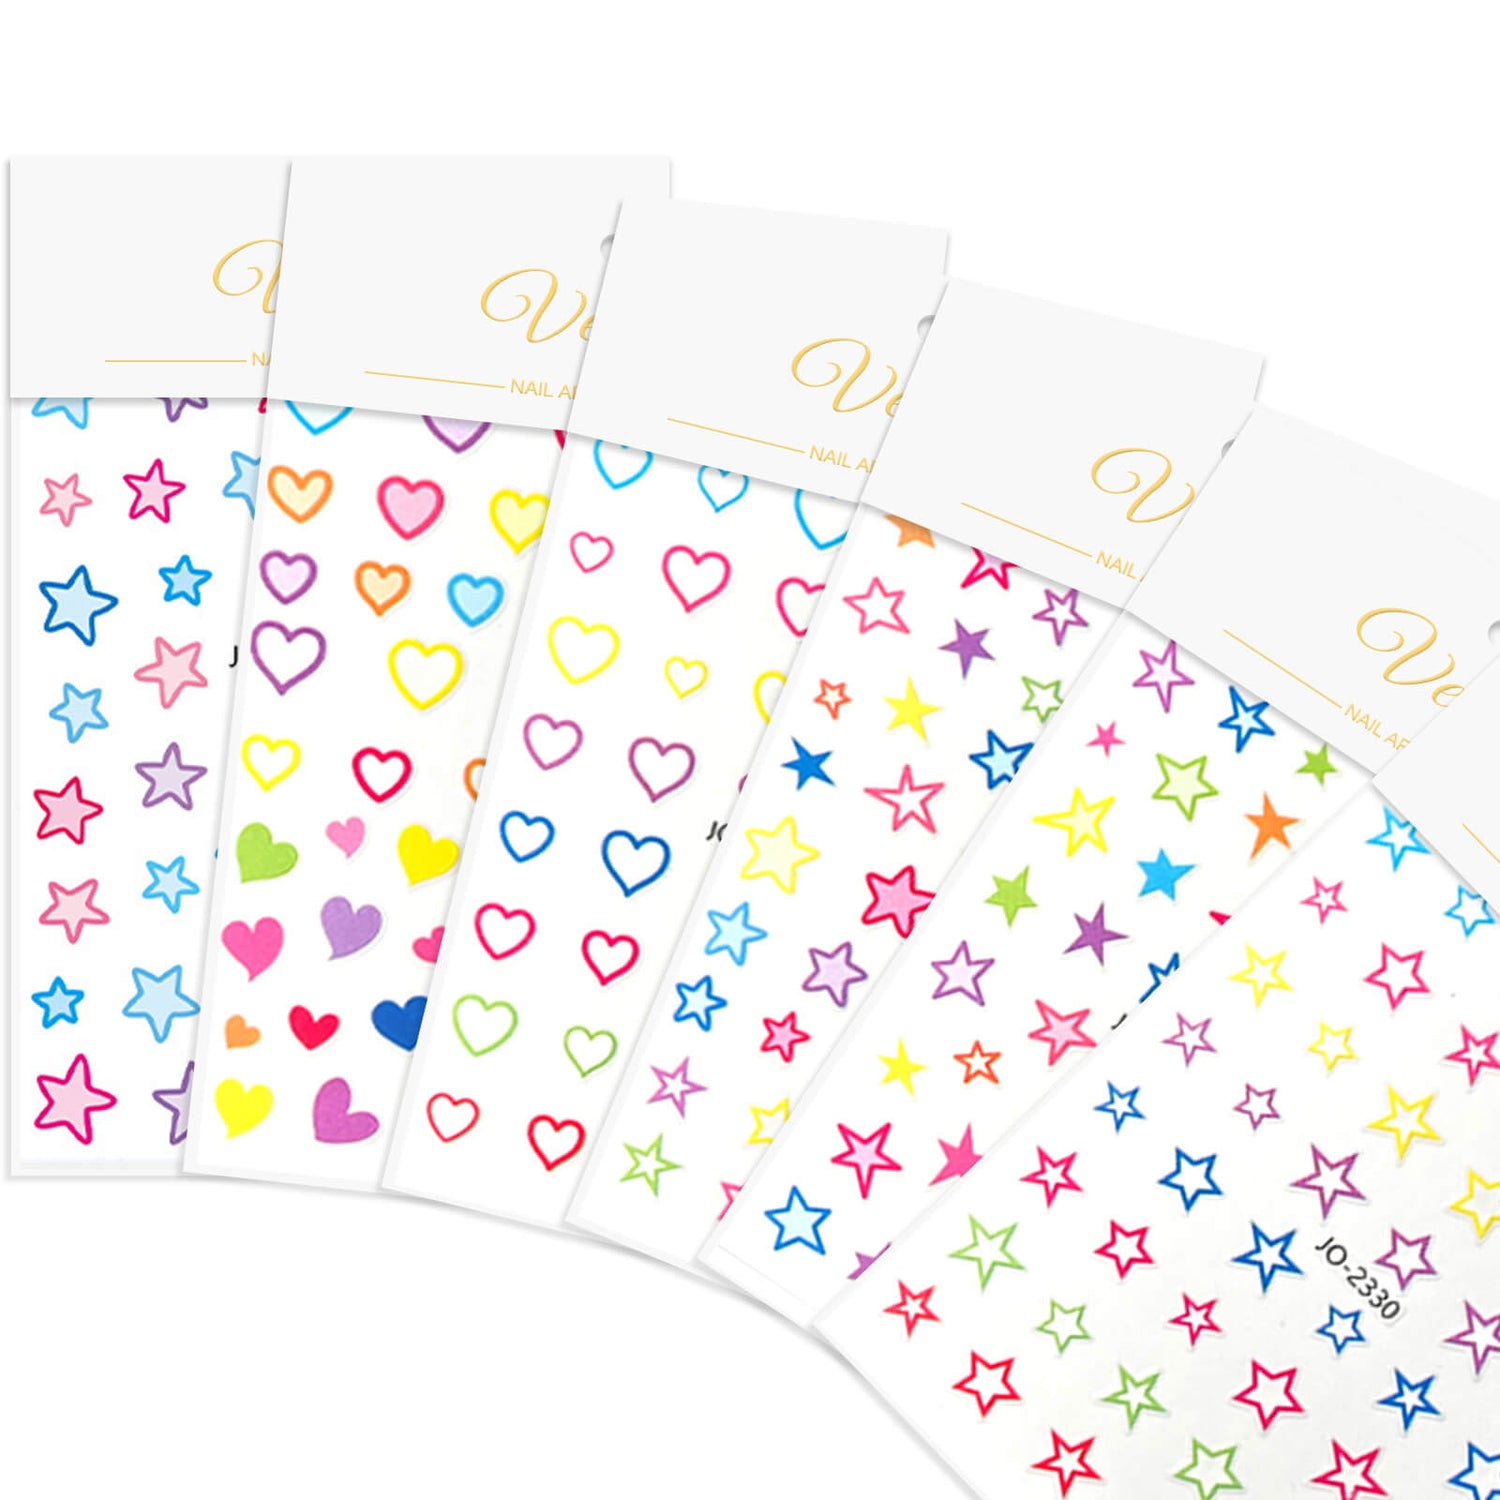 nail-art-stickers-colorful-star-set-all